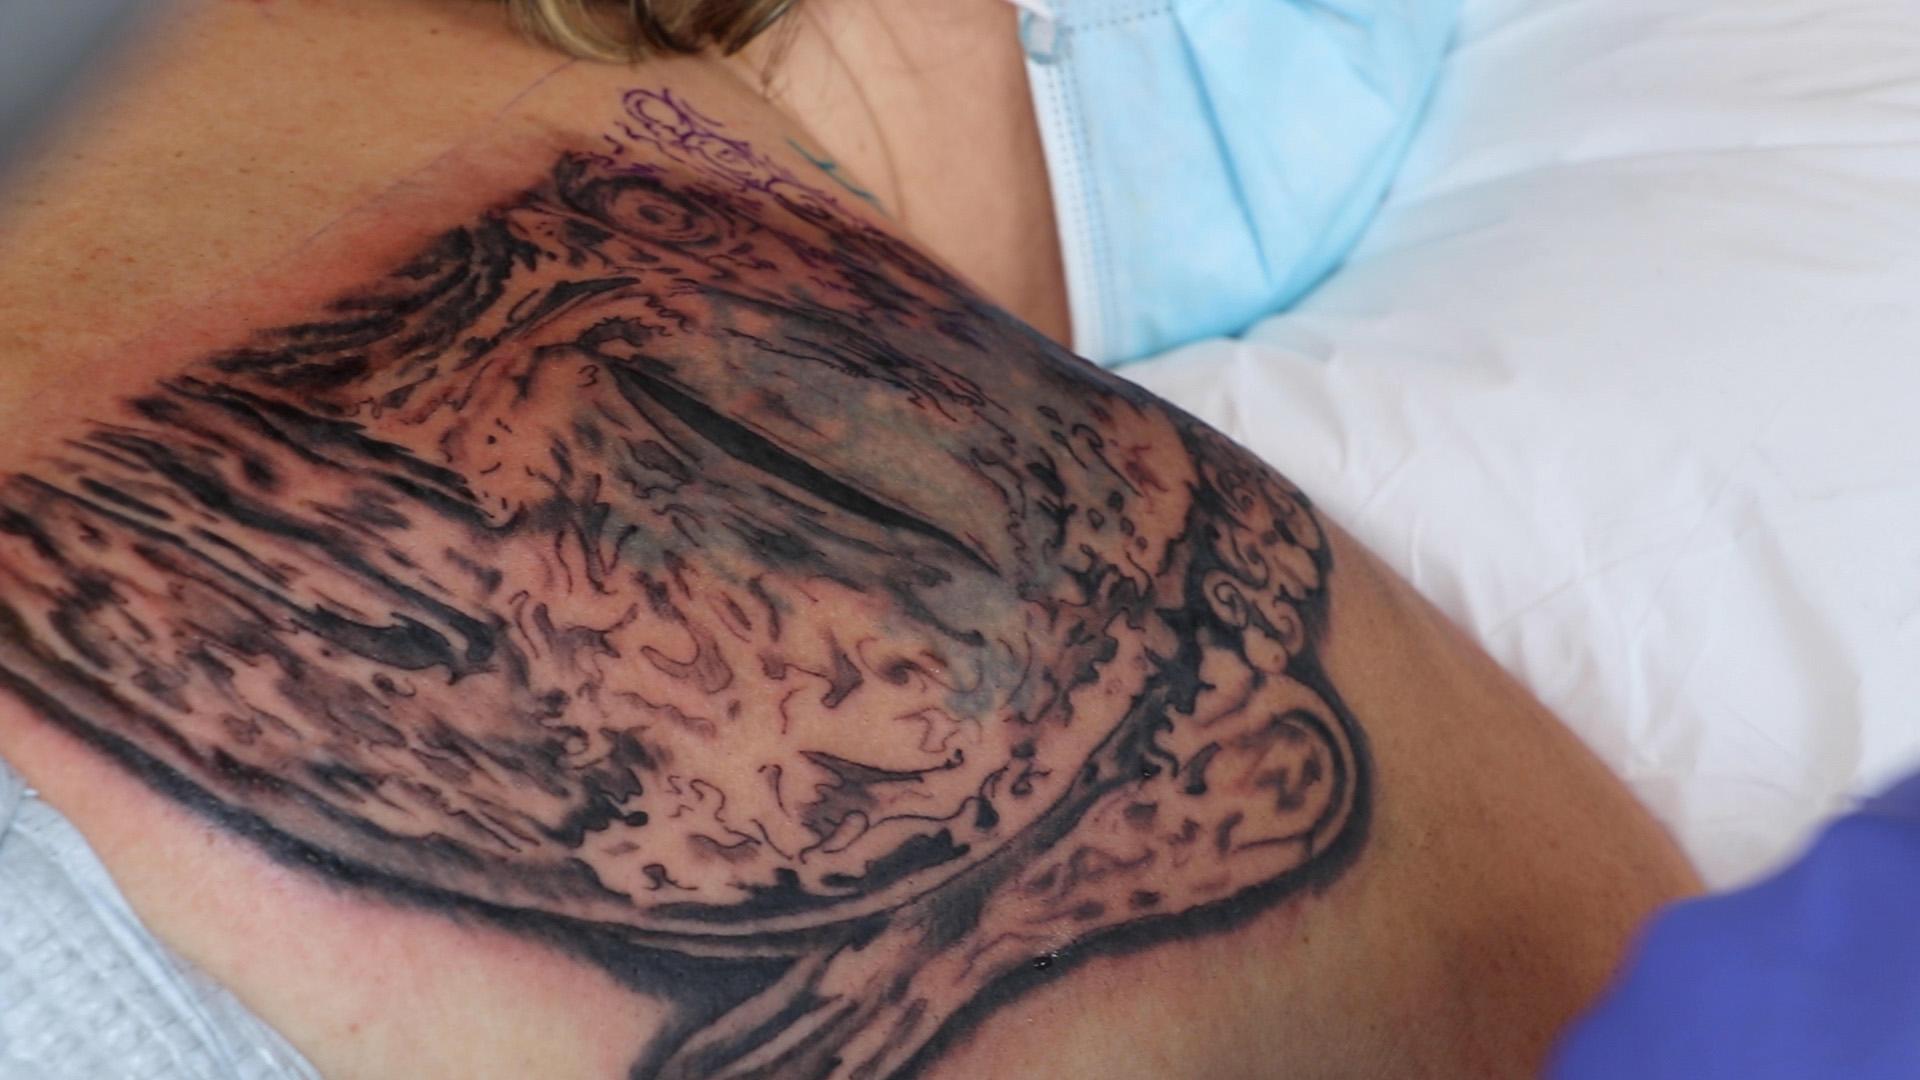 Jennifer Garcia’s tattoo of a dragon from 20 years ago is transformed into a portrait of Buddha by artist Patrick Cornolo, co-owner of Chicago’s Speakeasy Custom Tattoos, on June 22, 2020. (Evan Garcia / WTTW News)